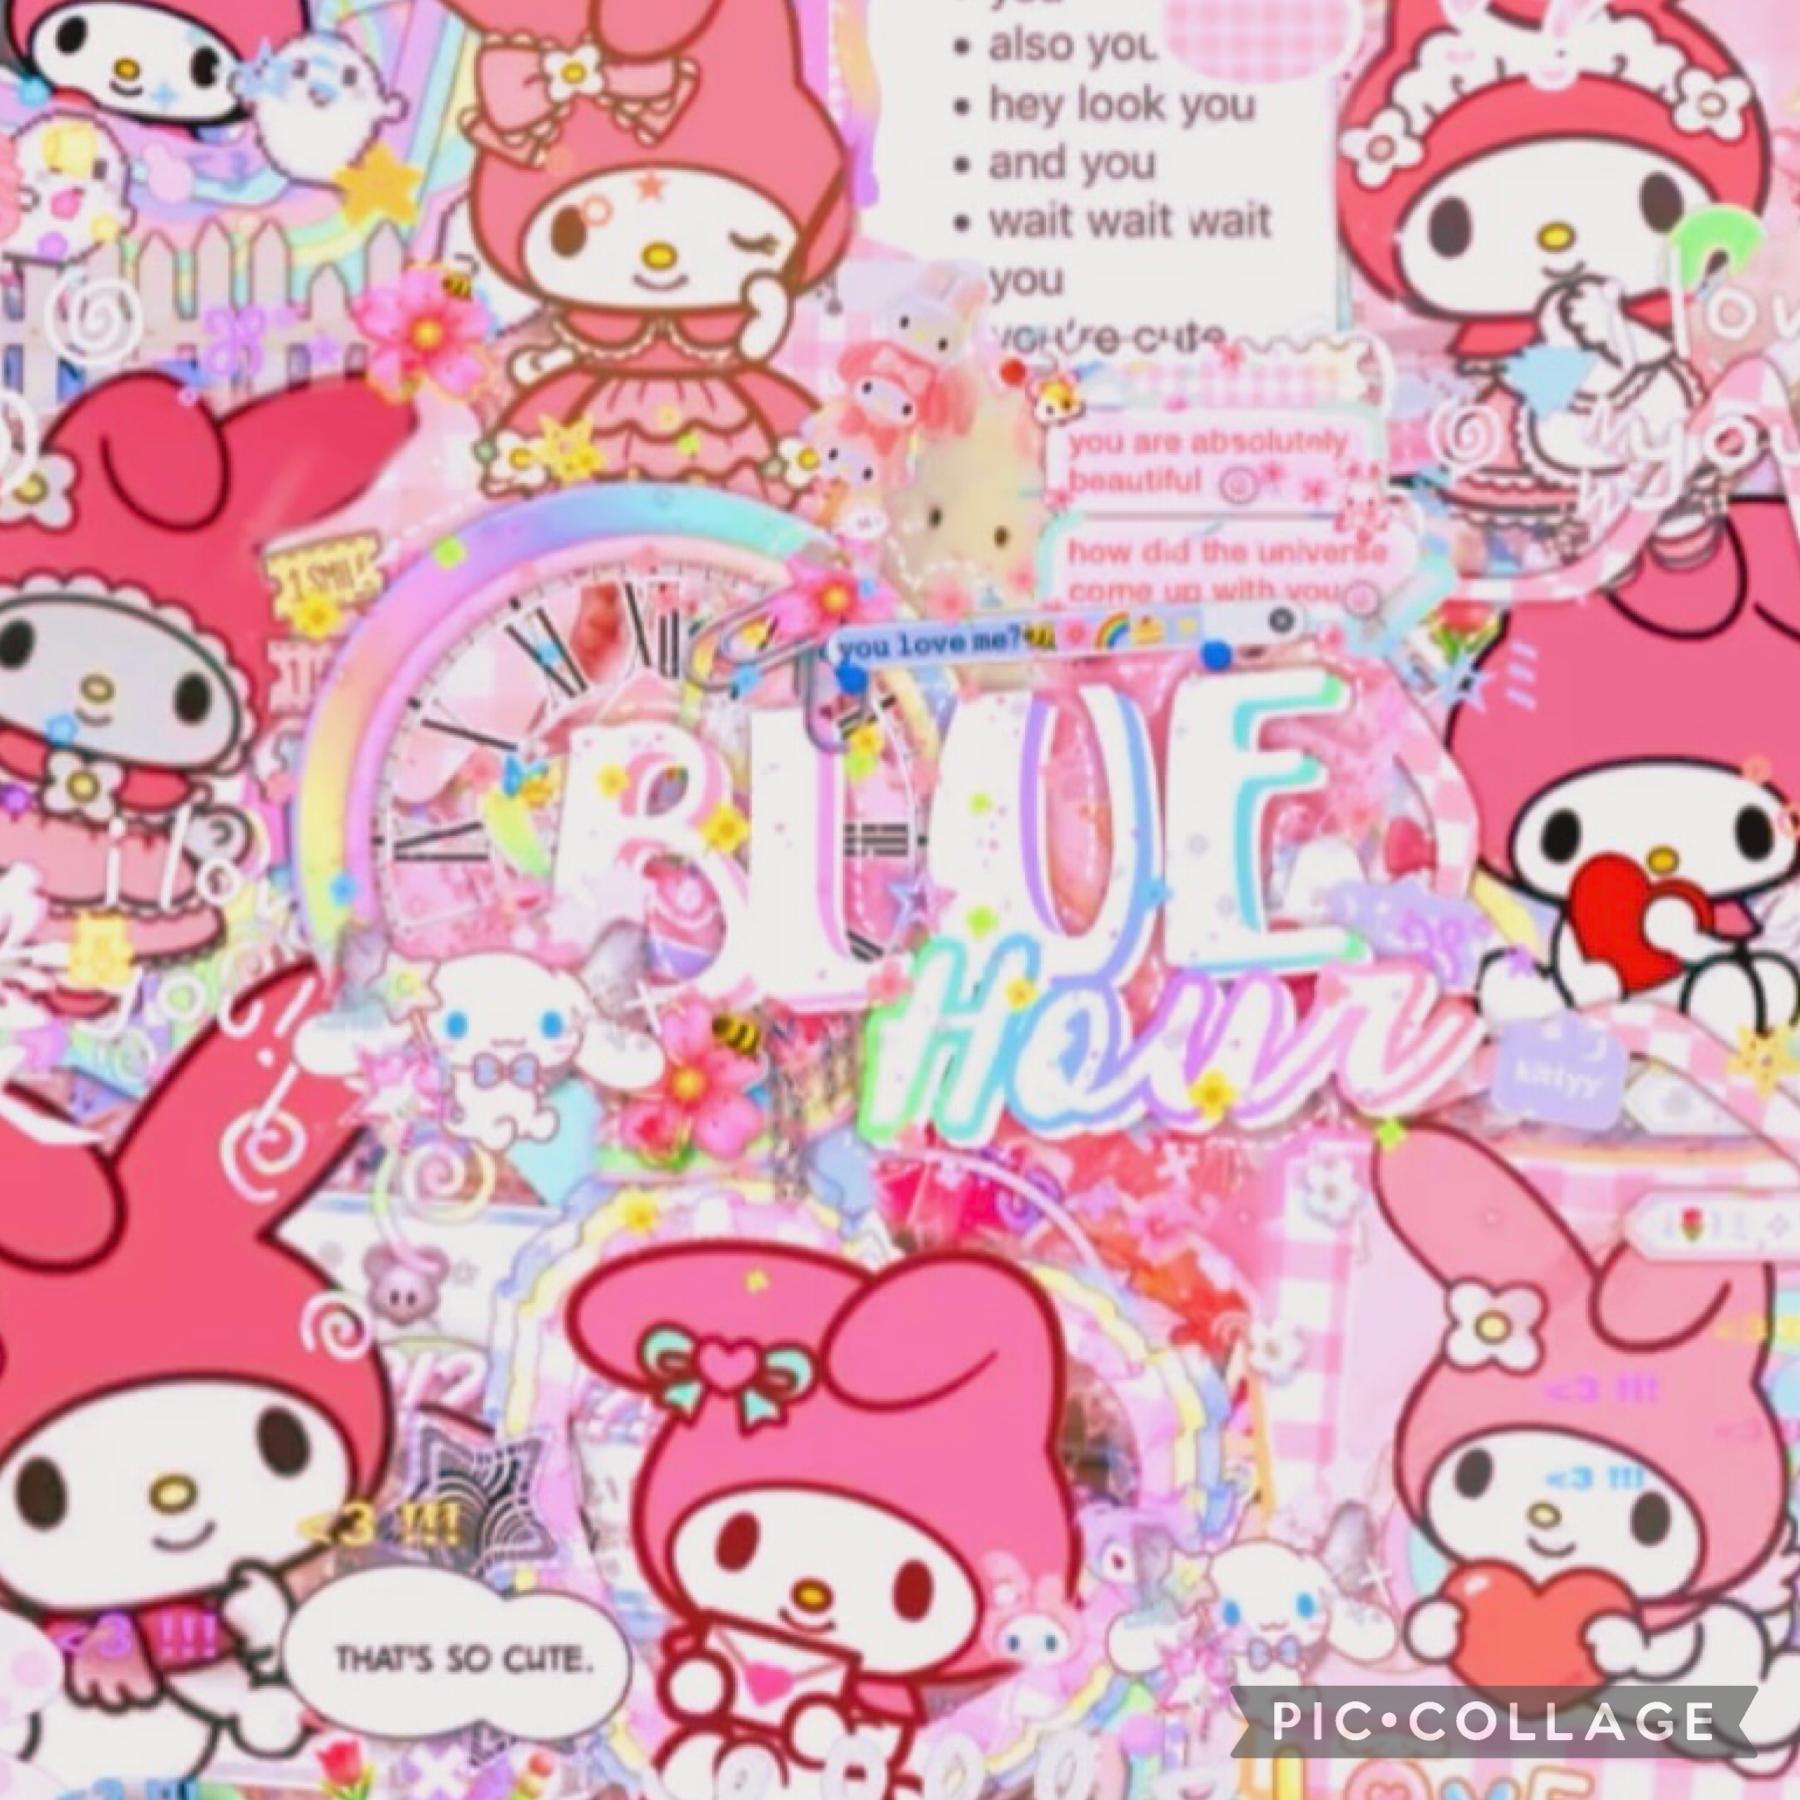 💗hey guys!💗
so i’m probably going to be filling ur feed with anime edits so beware :0 anyways- my new obsession is onegai my melody and sanrio  so yep. also tomorrow is my last day of school!! it’s gonna be a hot girl summer yall <33